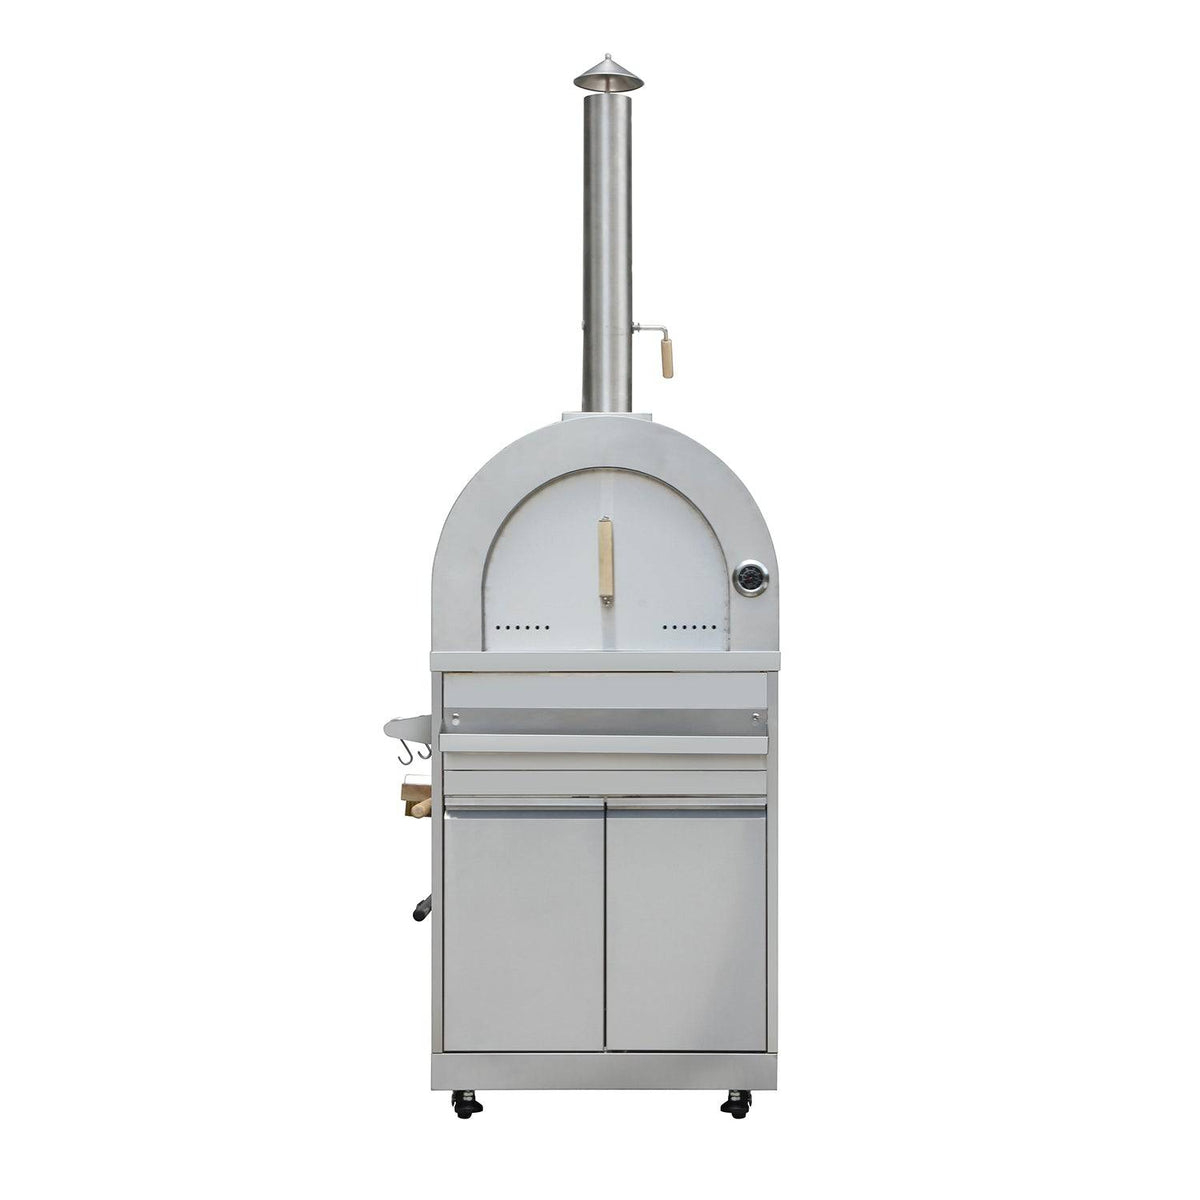 Fobest Stainless Steel Outdoor Wood Burning Pizza Oven with Cabinet